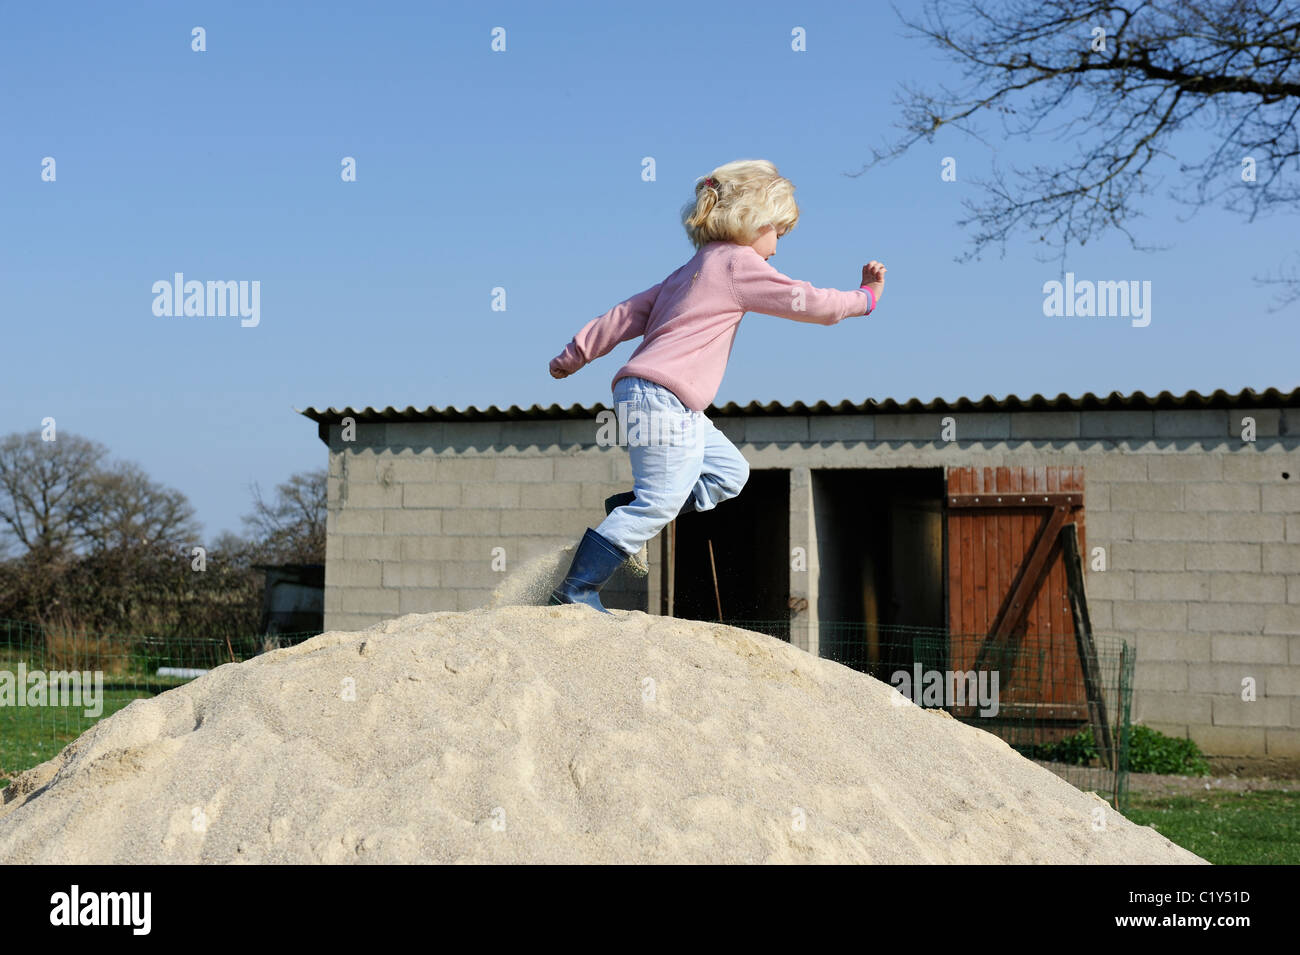 Stock Photo of a Five Year old Girl Running Across a Pile of Sand. Stock Photo